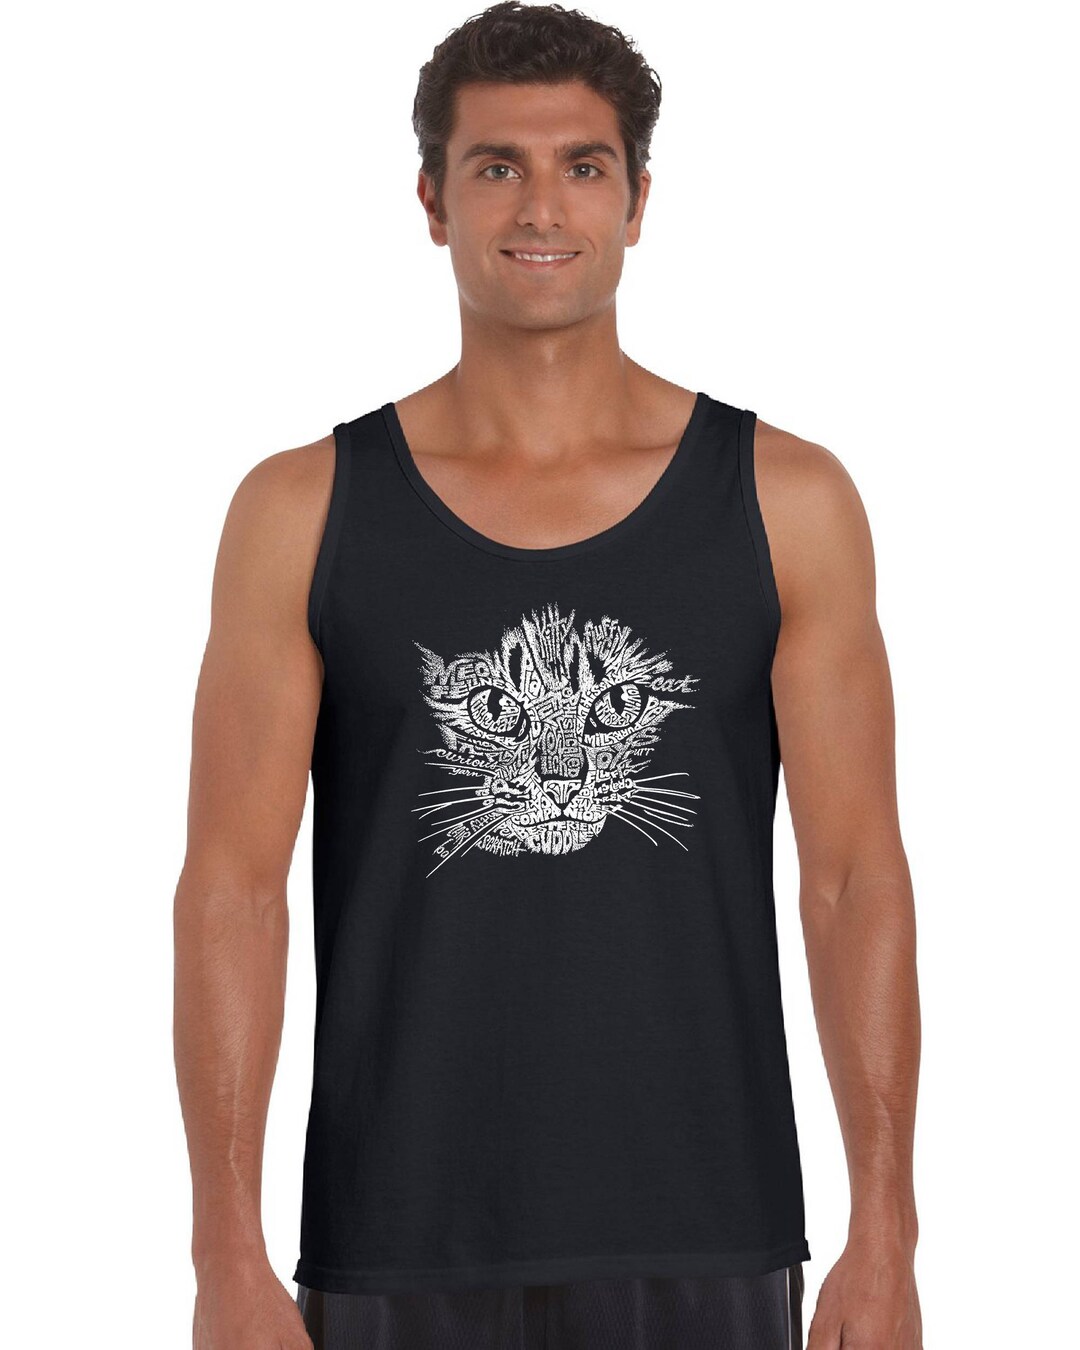 Men's Tank Top Created Out of Cat Themed Words Face - Etsy